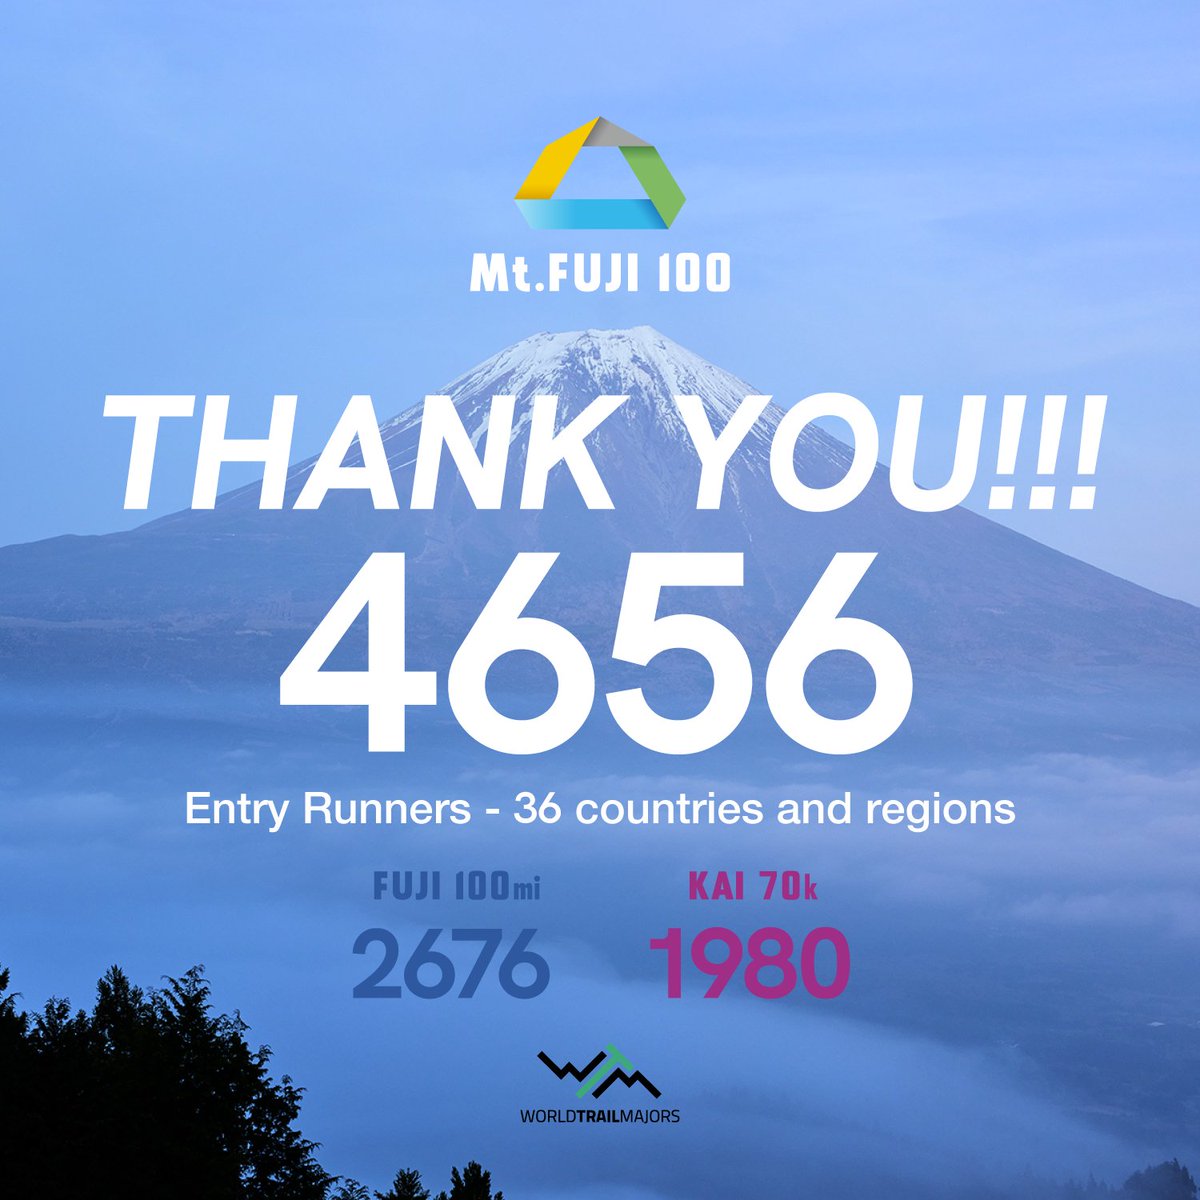 Have you checked the lottery results🤫?
Once again,
Thank you for all the entries 👏!!!

#MtFUJI100 2024
The total number of entries is 4,656 athletes from 36 countries 🏃‍♂️🏃‍♀️!!!
#FUJI100mi 2,676 athletes🗻!
#KAI70k 1,980 athletes🗻!

We look forward to seeing you all in April 2024